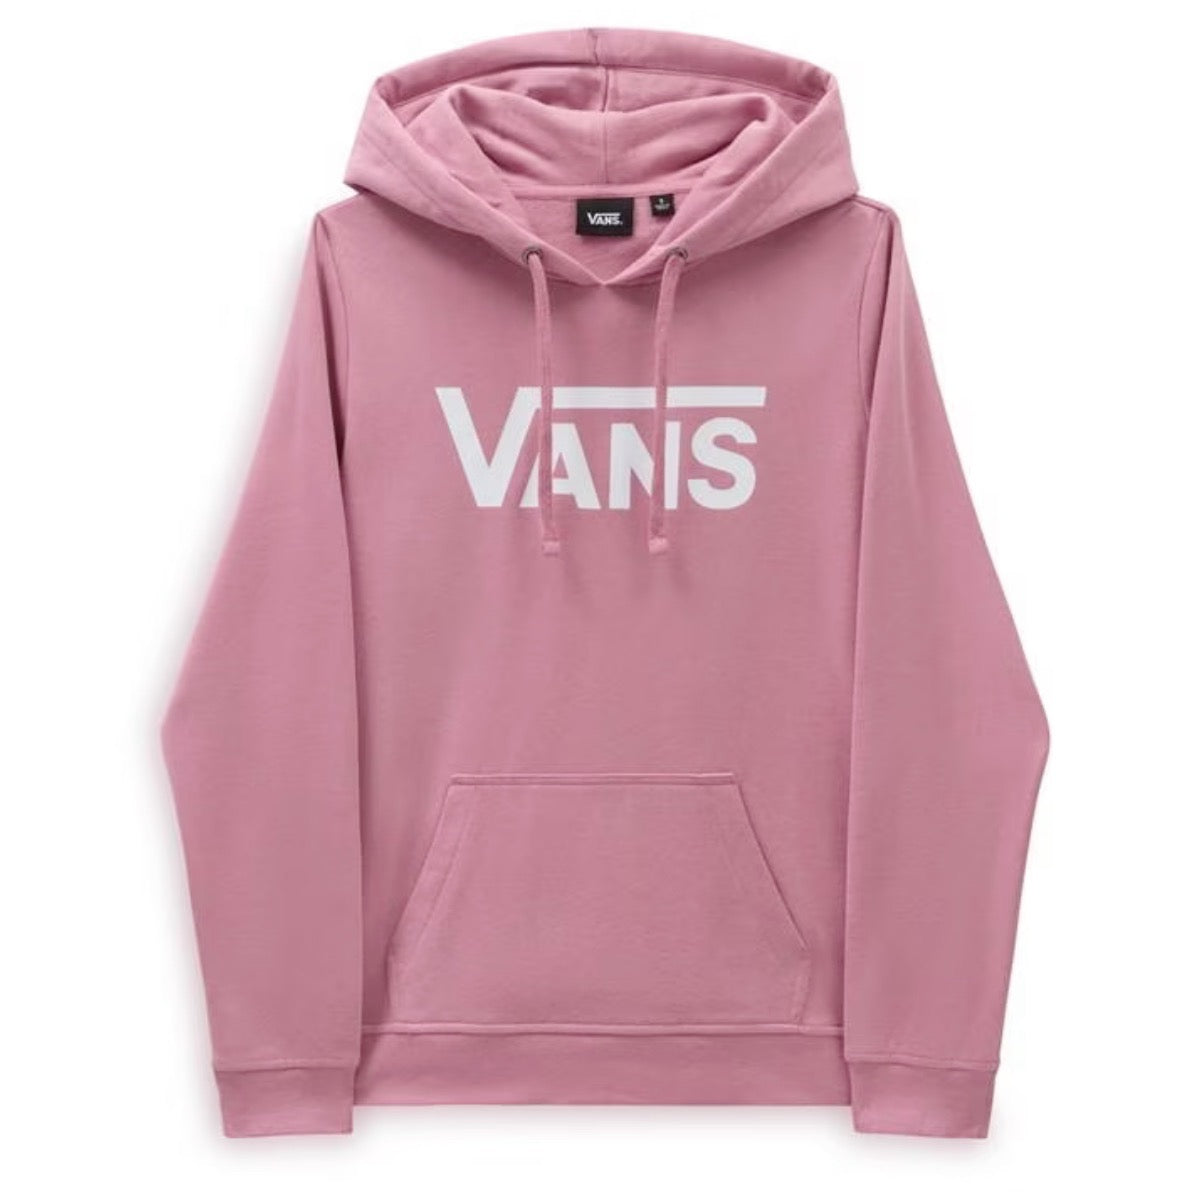 Vans Womens Drop Hoodie Vn0a5hnpc3s1 Foxlove Clothing XS ADULT / Pink,SMALL ADULT / Pink,MEDIUM ADULT / Pink,LARGE ADULT / Pink